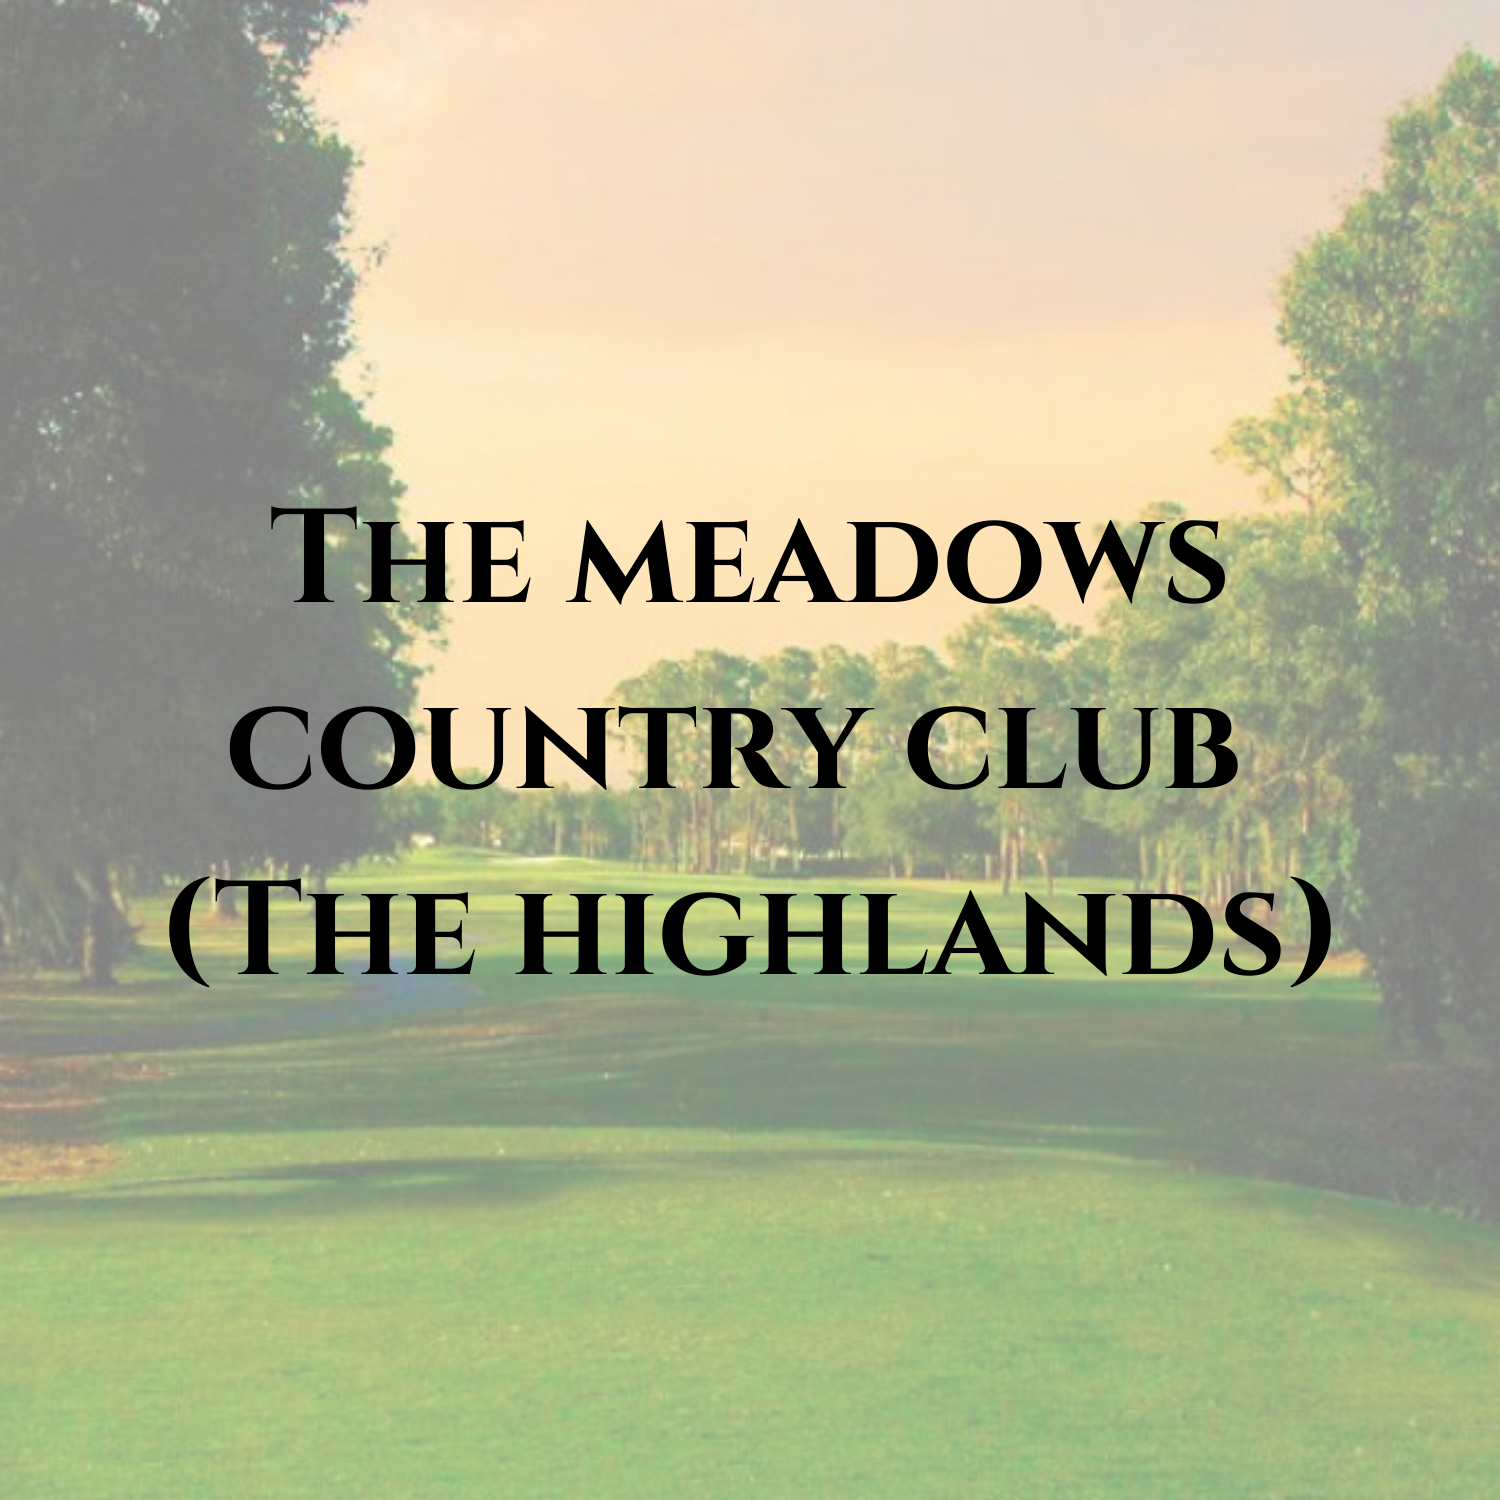 The Meadows Country Club- The Highlands 1x1 for website.png